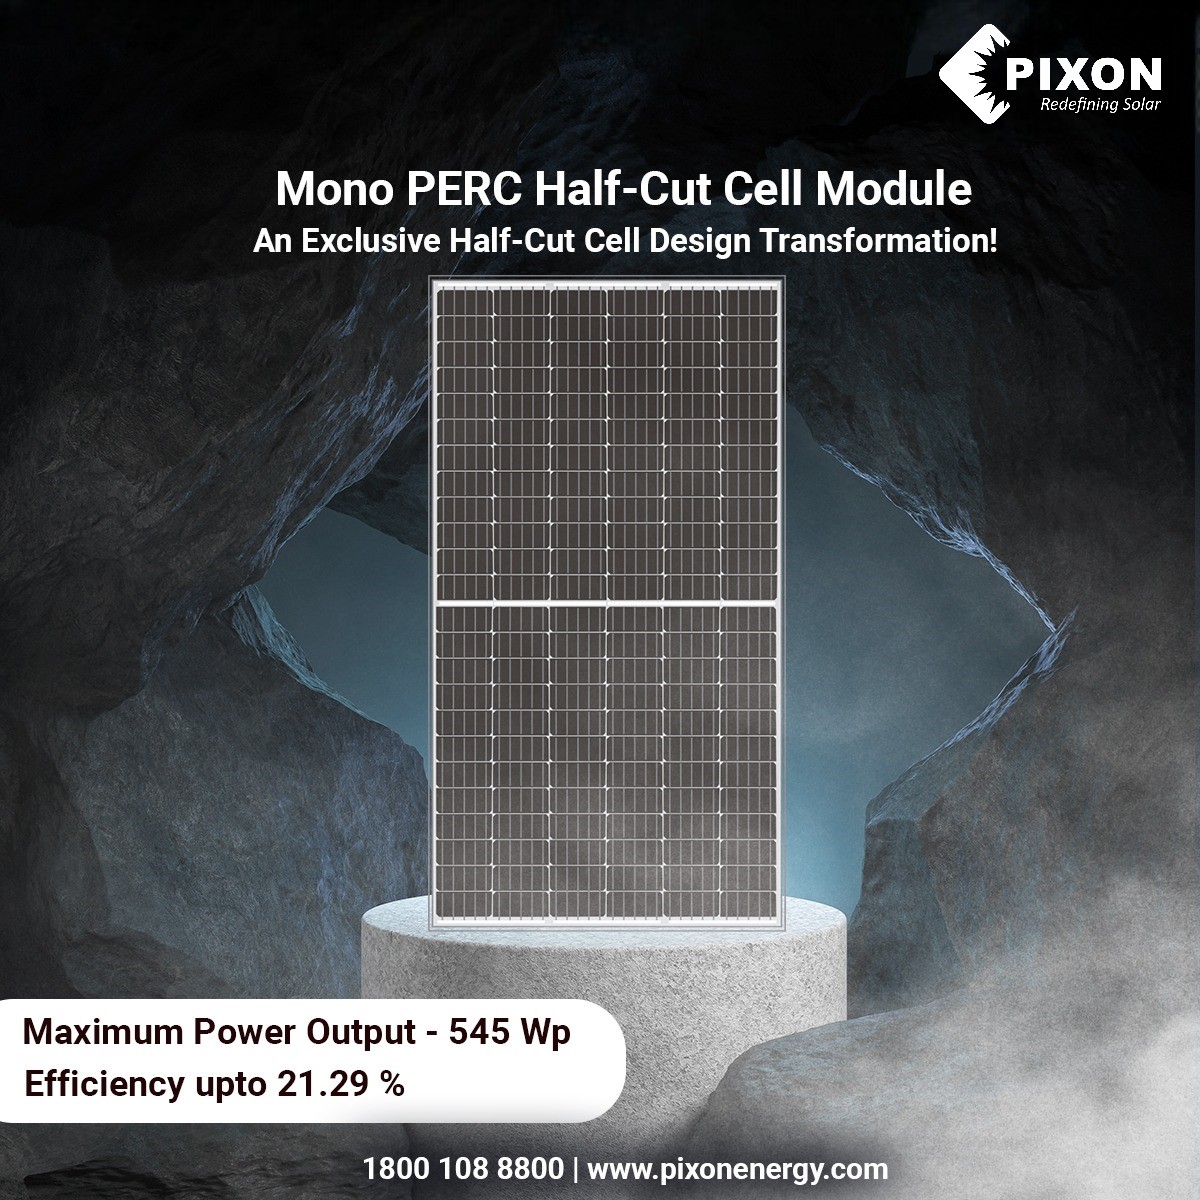 Where excellence meets innovation!

Experience unmatched efficiency with our Mono Perc Half Cut Cell Module - A solar innovation designed for superior performance. 

#pixonsolar #solarpower #modulemanufacturer #solarmodules #solarpanels #sustainablefuture #solarenergy